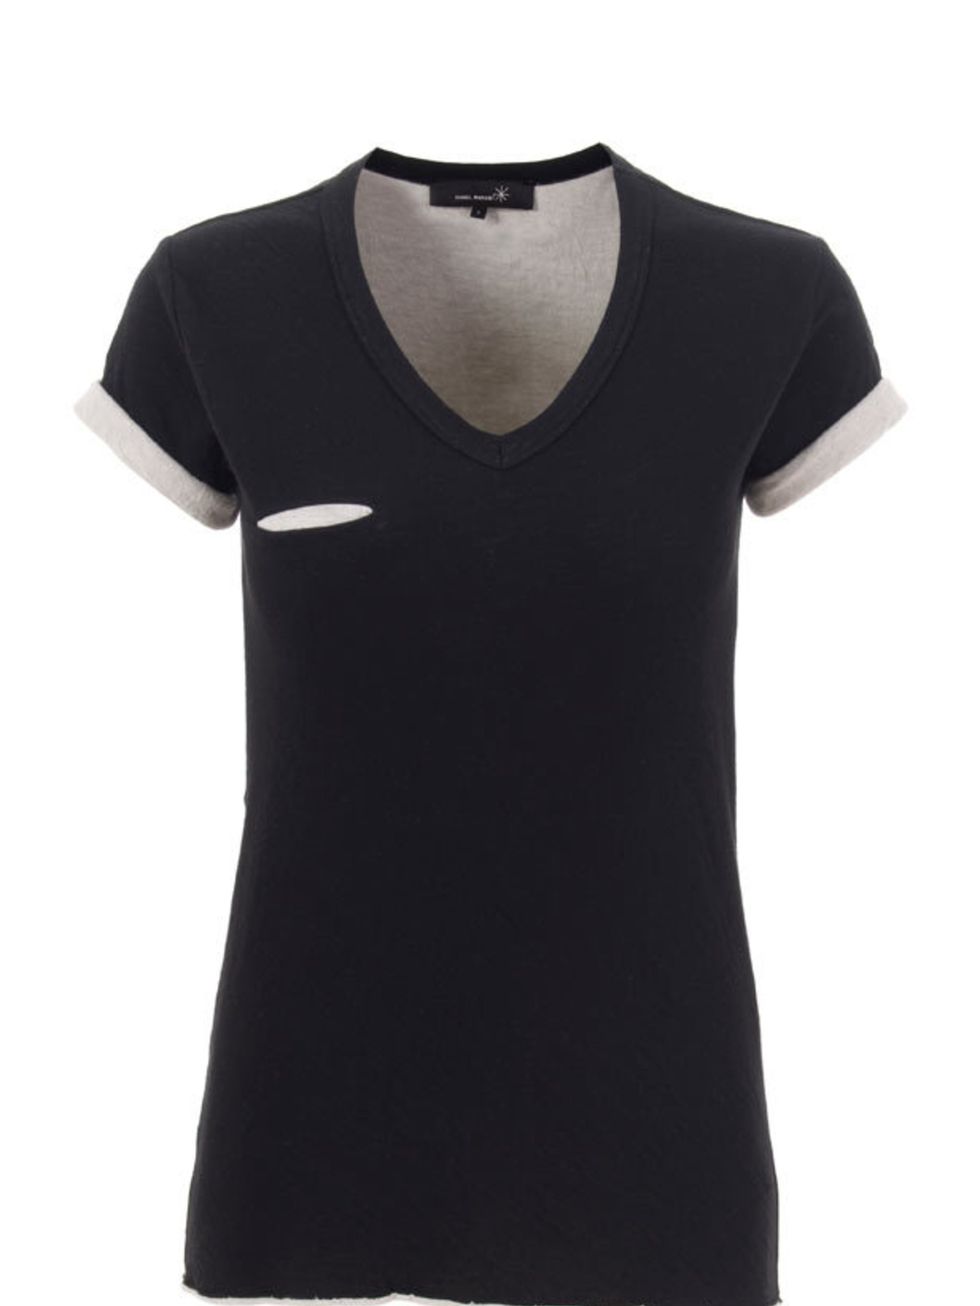 <p>Double layer T-shirt, £99.50 (was £139.50), by Isabel Marant at <a href="http://www.start-london.com/shop/short%20sleeve%20v%20neck%20dbl%20layer%20tee-p-322.html">Start</a> </p>